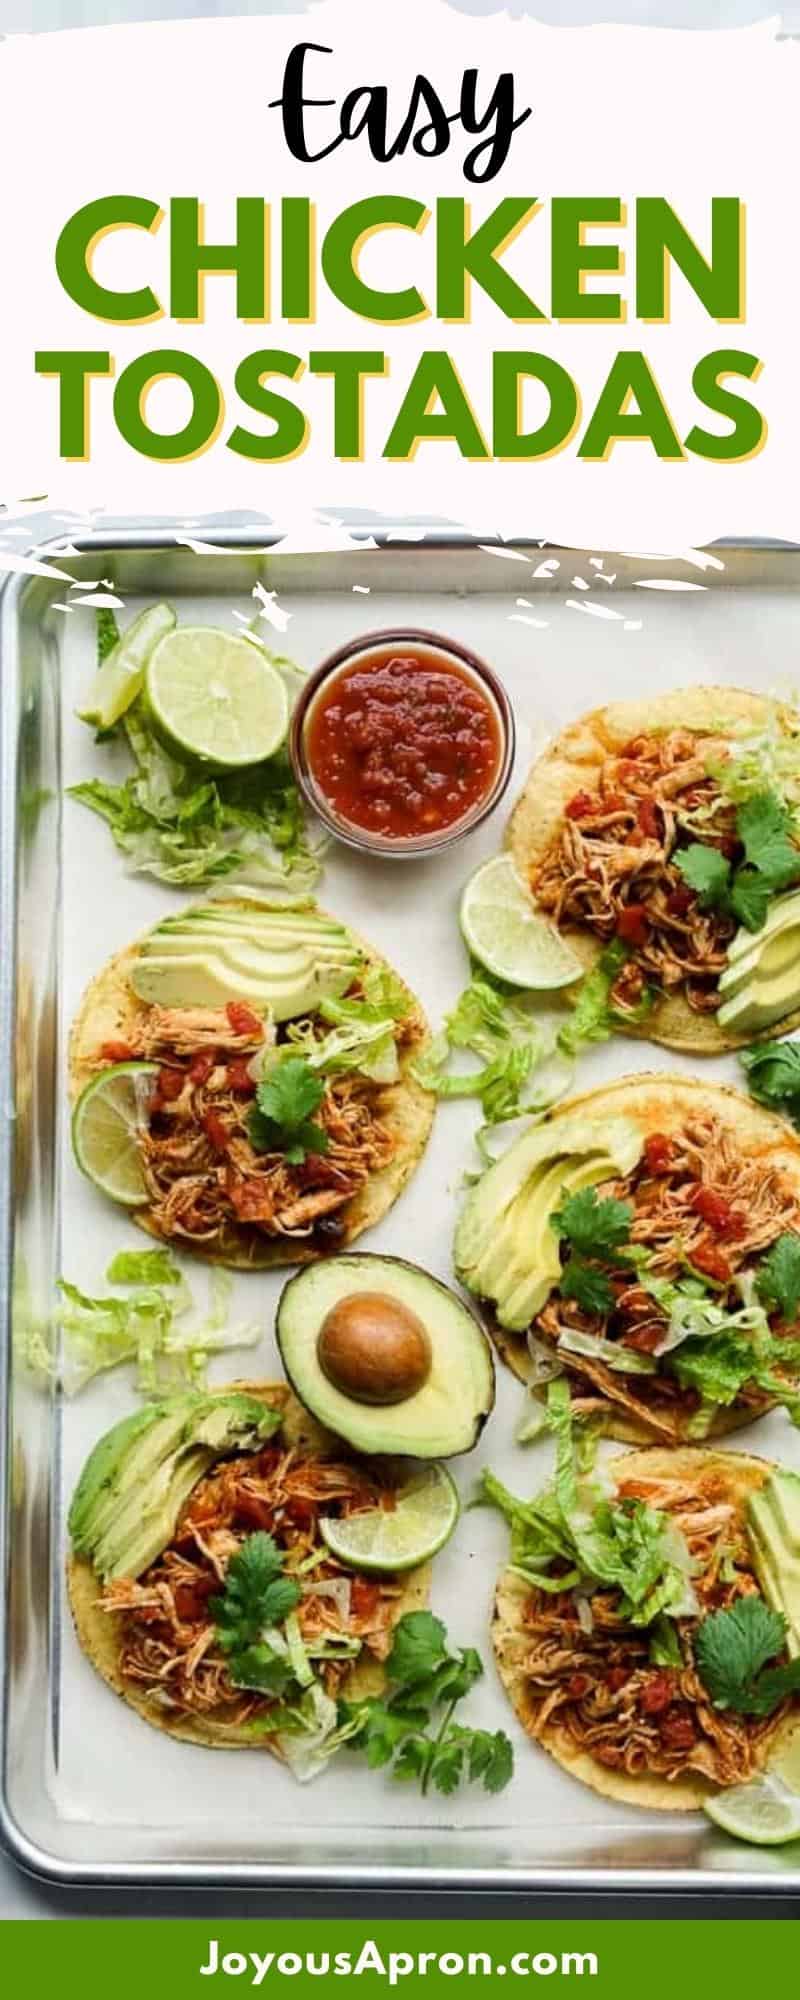 Chipotle Chicken Tostadas - An easy Mexican and Tex-Mex recipe, ready under 20 minutes! Crispy tostadas topped with flavorful shredded chipotle chicken, sliced avocados, cilantro, lettuce and a wedge of lime. via @joyousapron